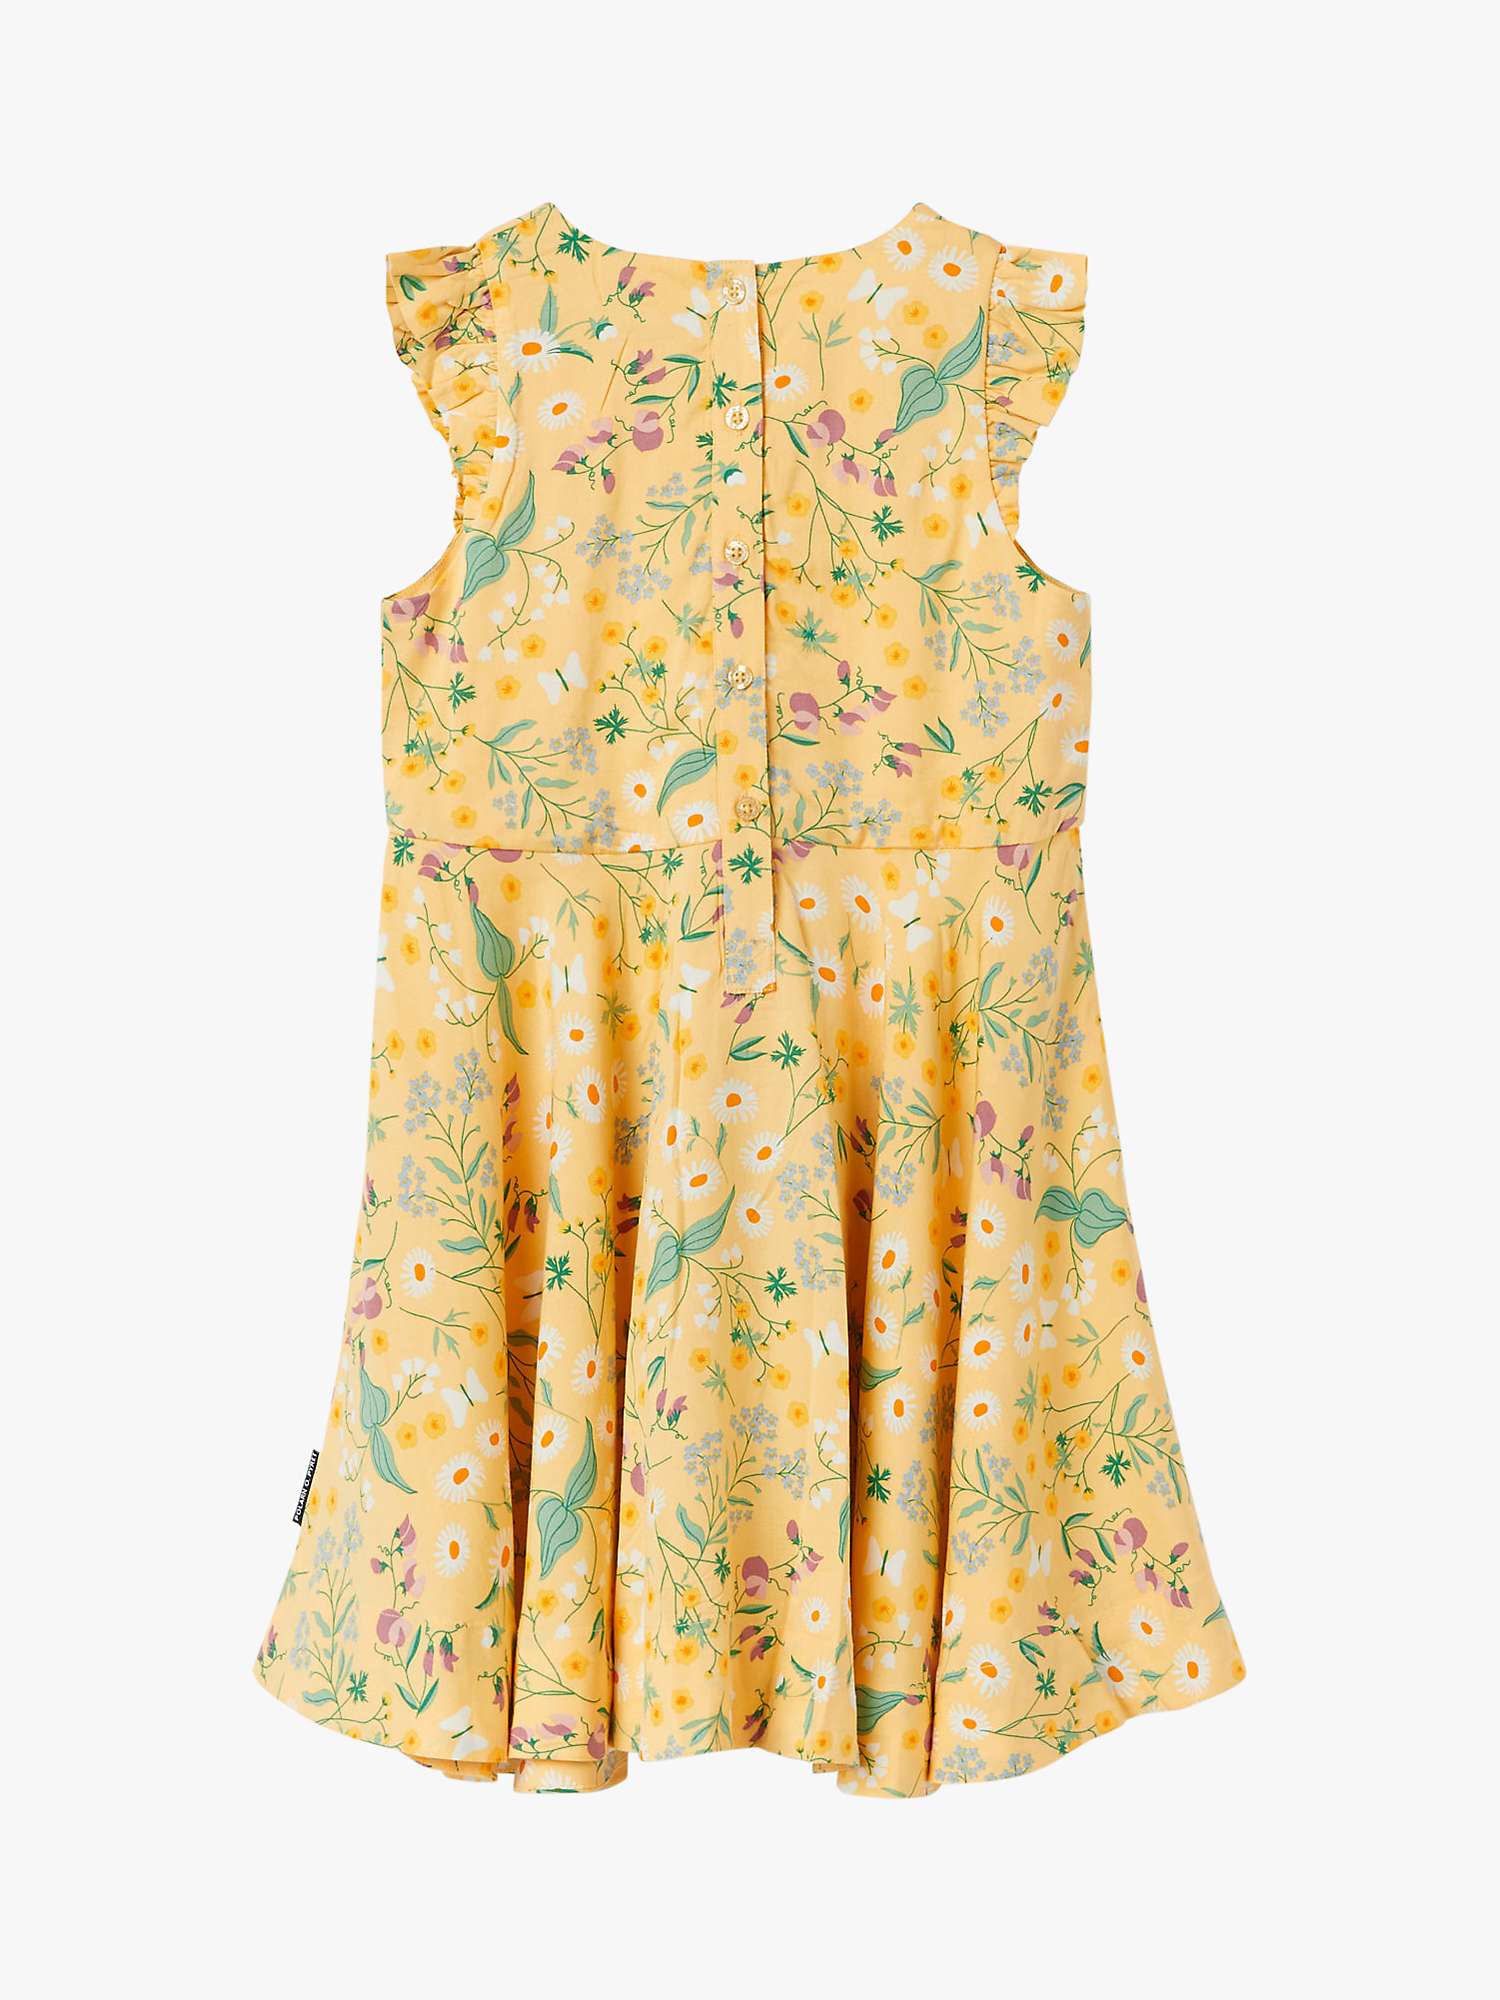 Buy Polarn O. Pyret Baby Floral Dress, Yellow Online at johnlewis.com